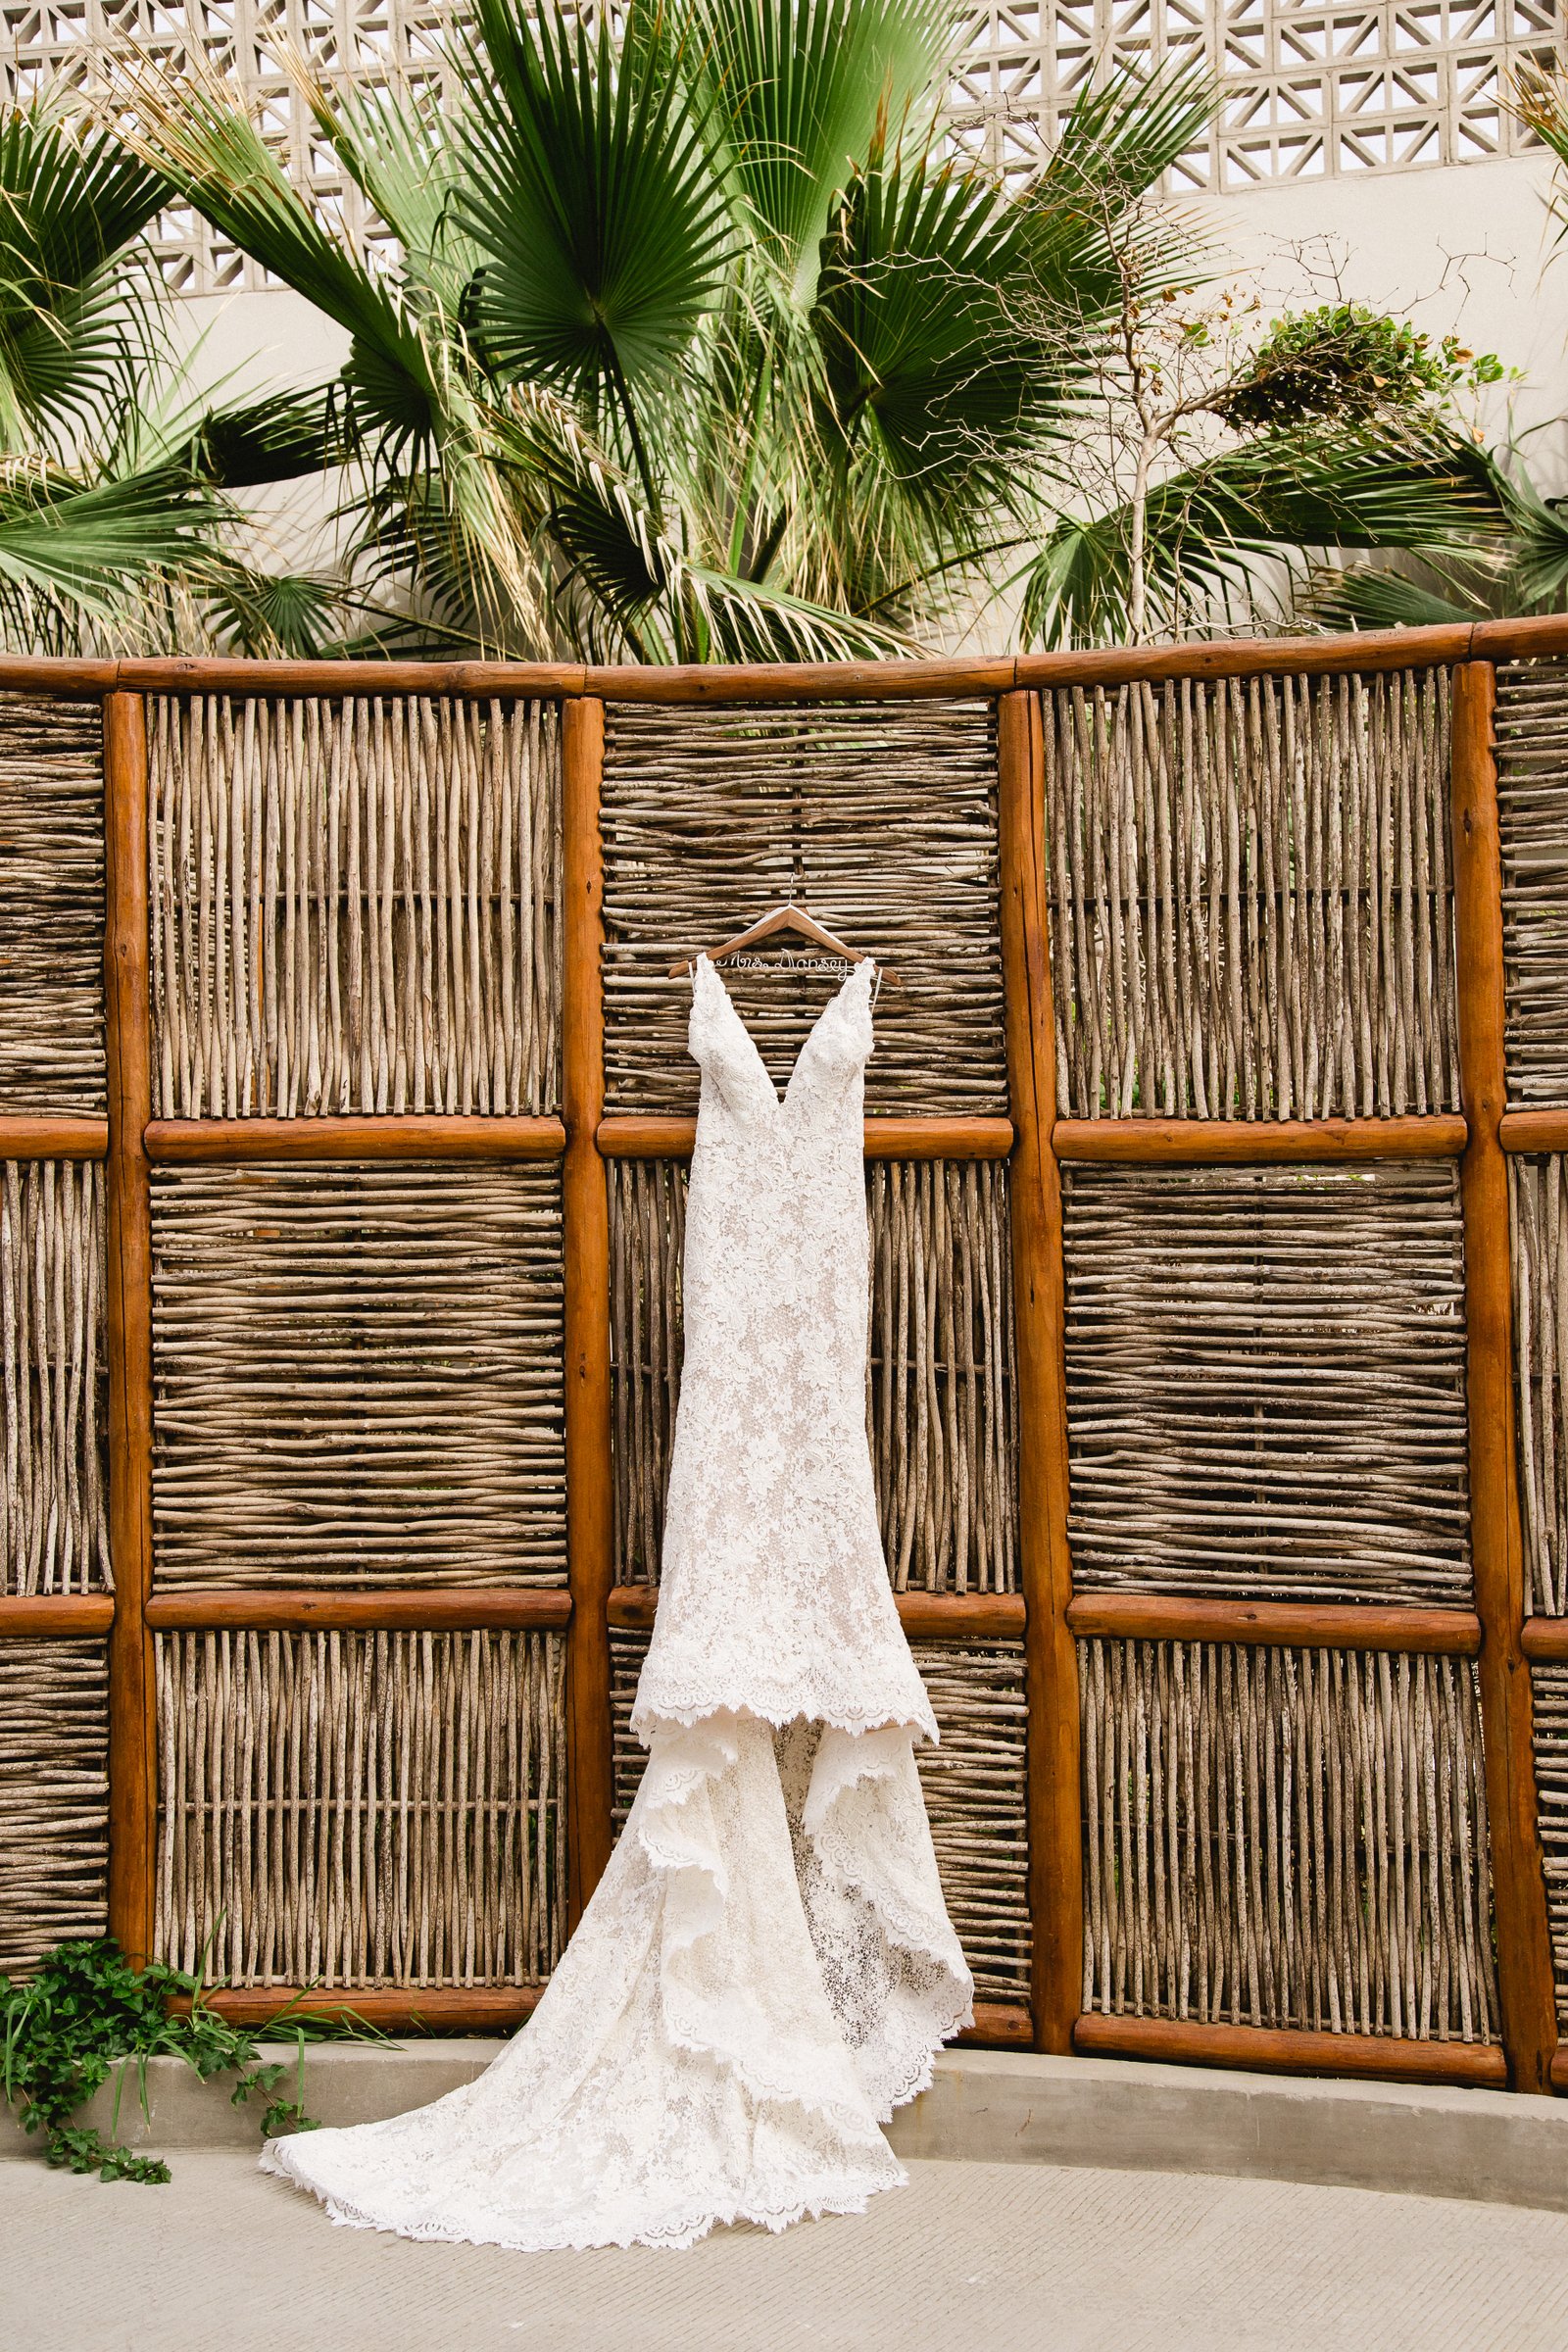 Wedding Dress by Vera Wang worn by our Bride Ashley. Ashley and Matthew got married at The Cape, a beautiful boutique hotel located in Los Cabos, Mexico. Best Destination wedding venue and wedding planning by Cabo Wedding Services